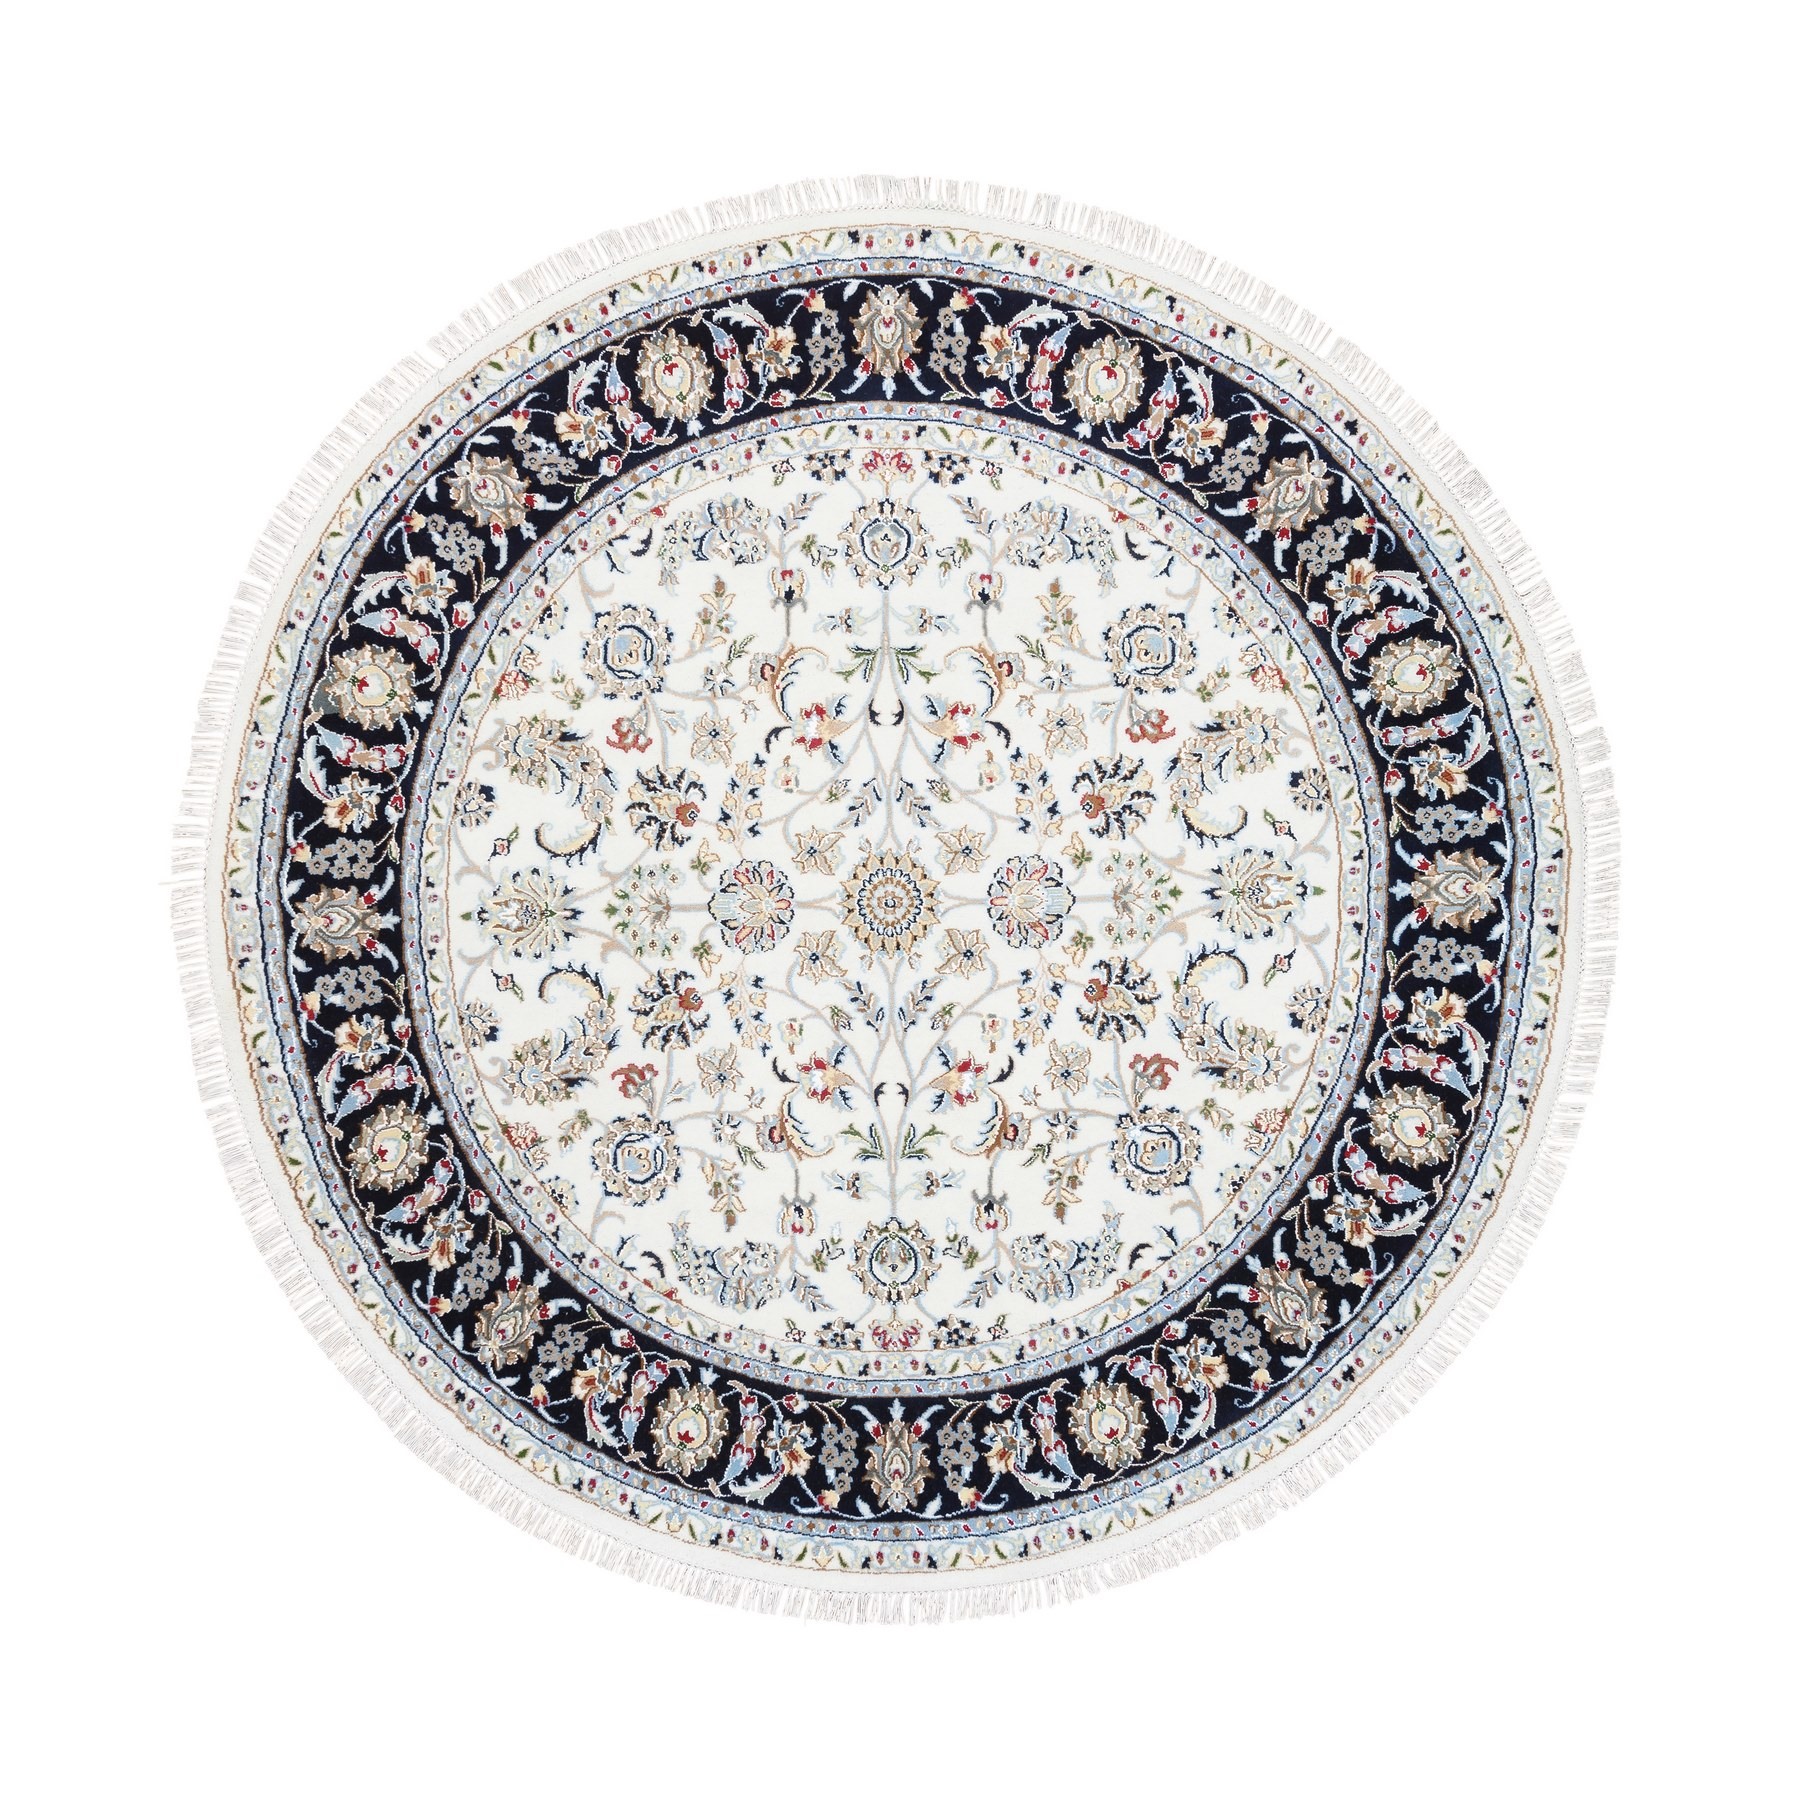 Pirniakan Collection Hand Knotted Ivory Rug No: 1125586